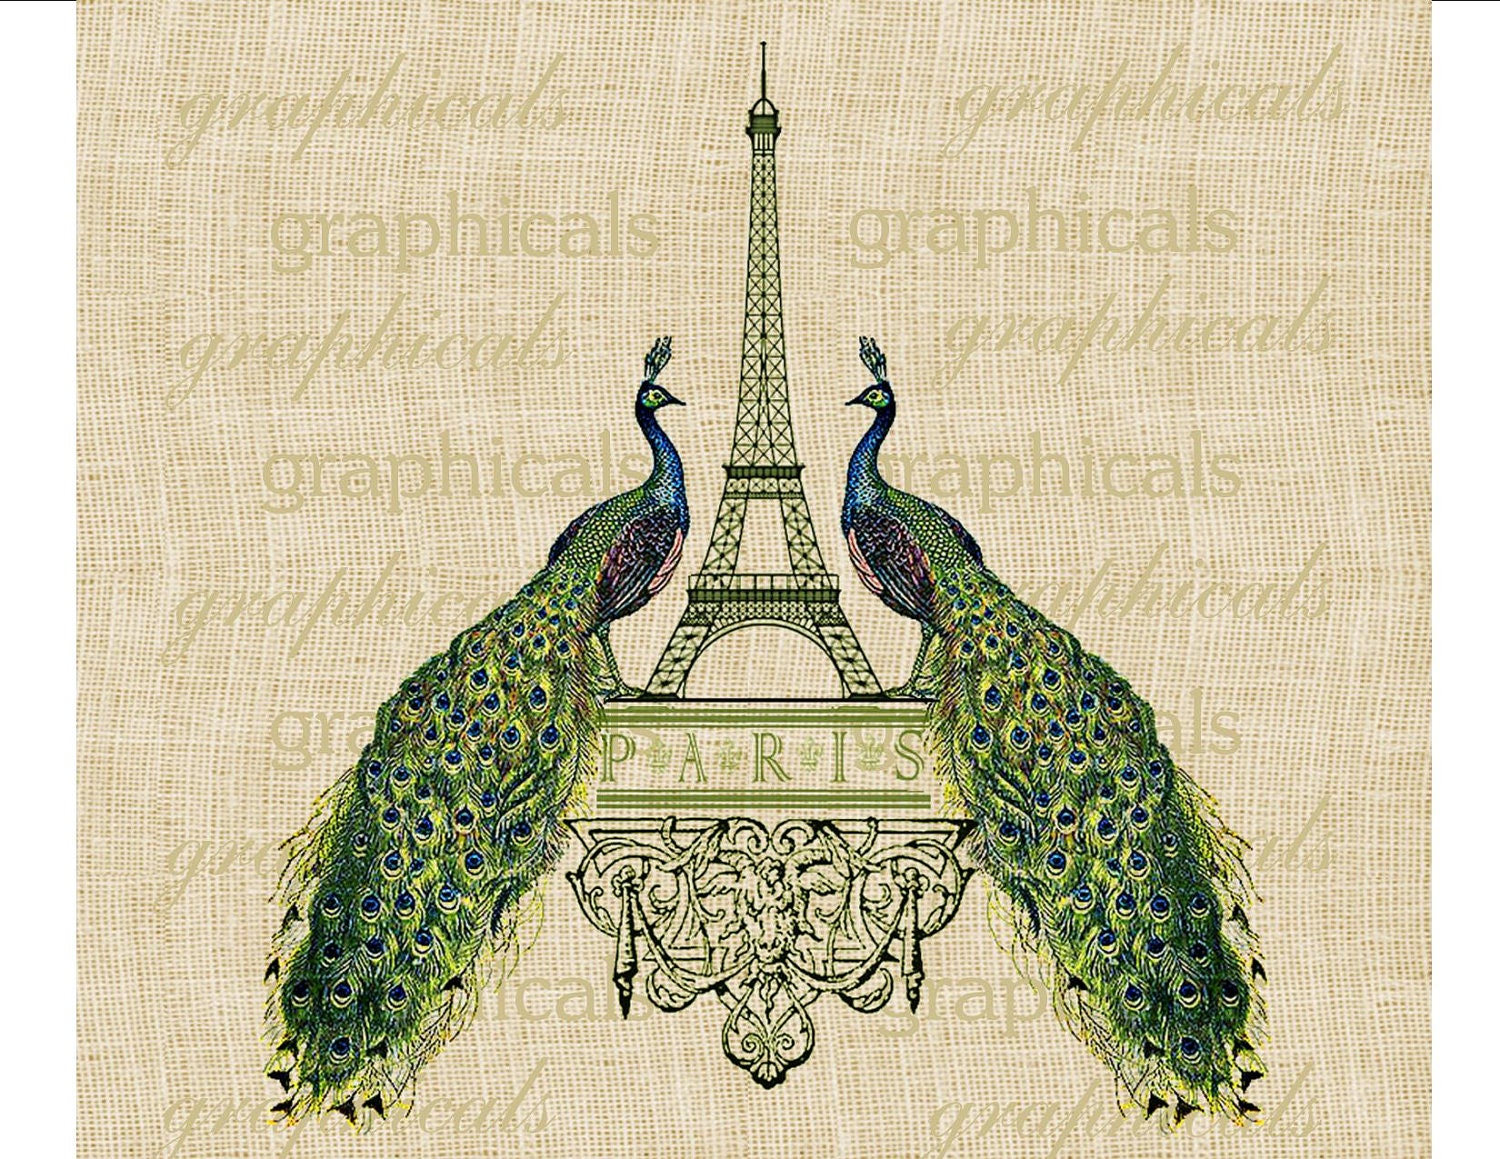 Paris Eiffel Tower Peacocks Digital download image for iron on fabric transfer burlap decoupage paper pillows tote bags No. 554